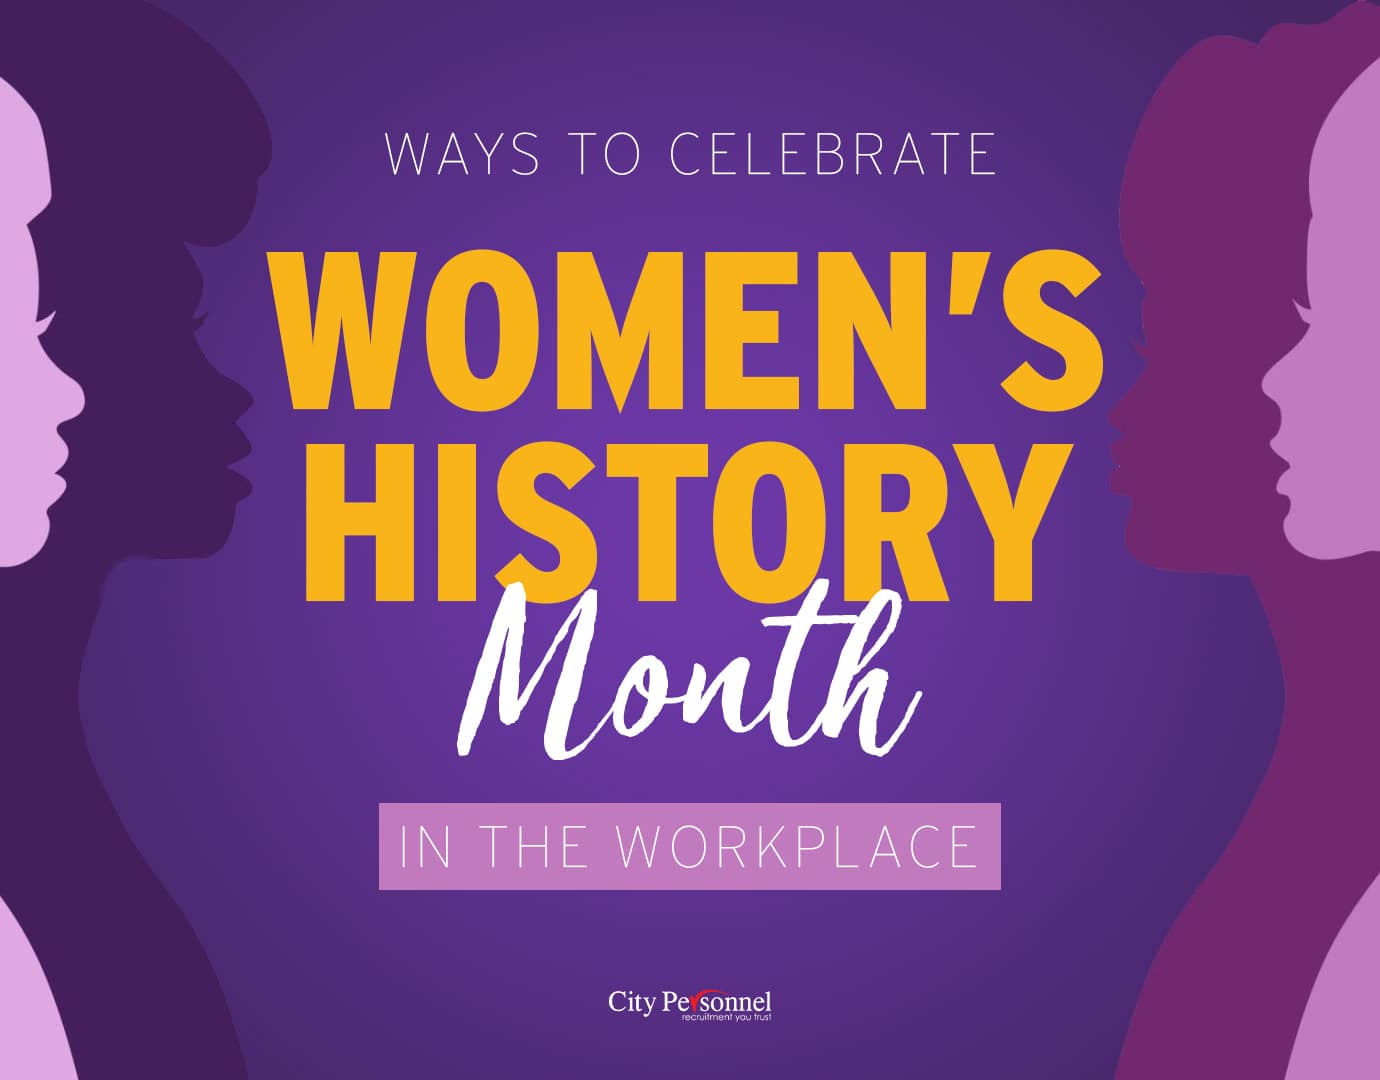 Ways to Celebrate Women's History Month in the Workplace